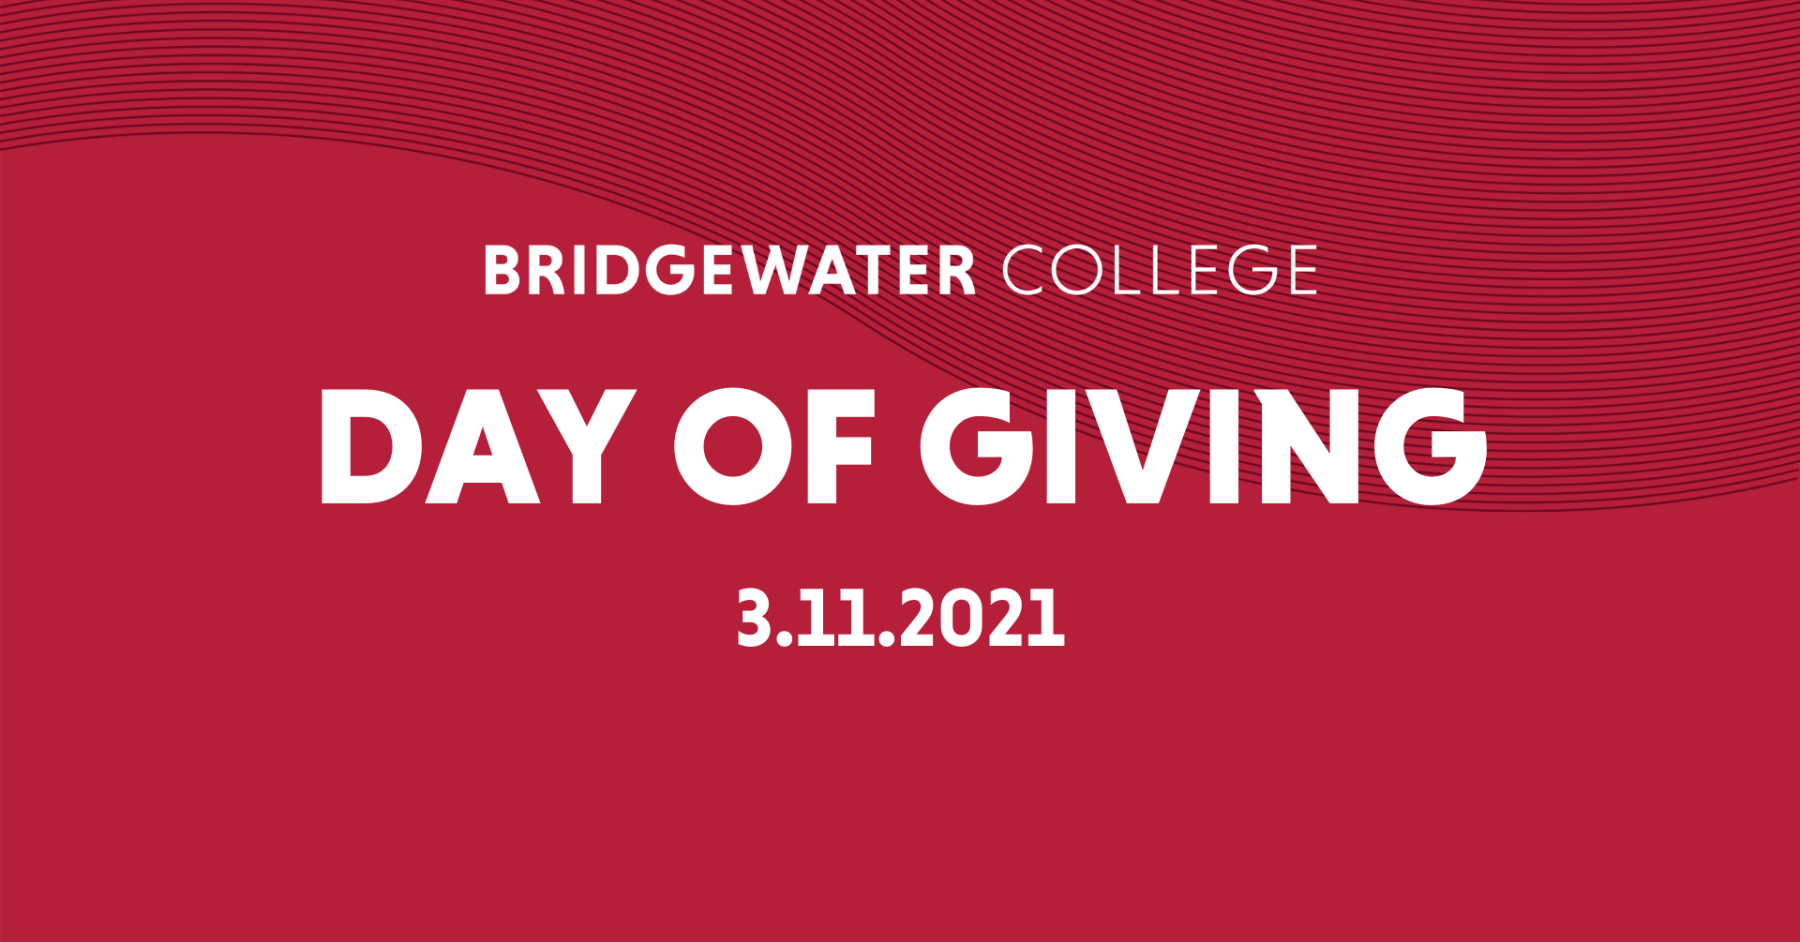 Bridgewater College Day of Giving, 3-11-2021